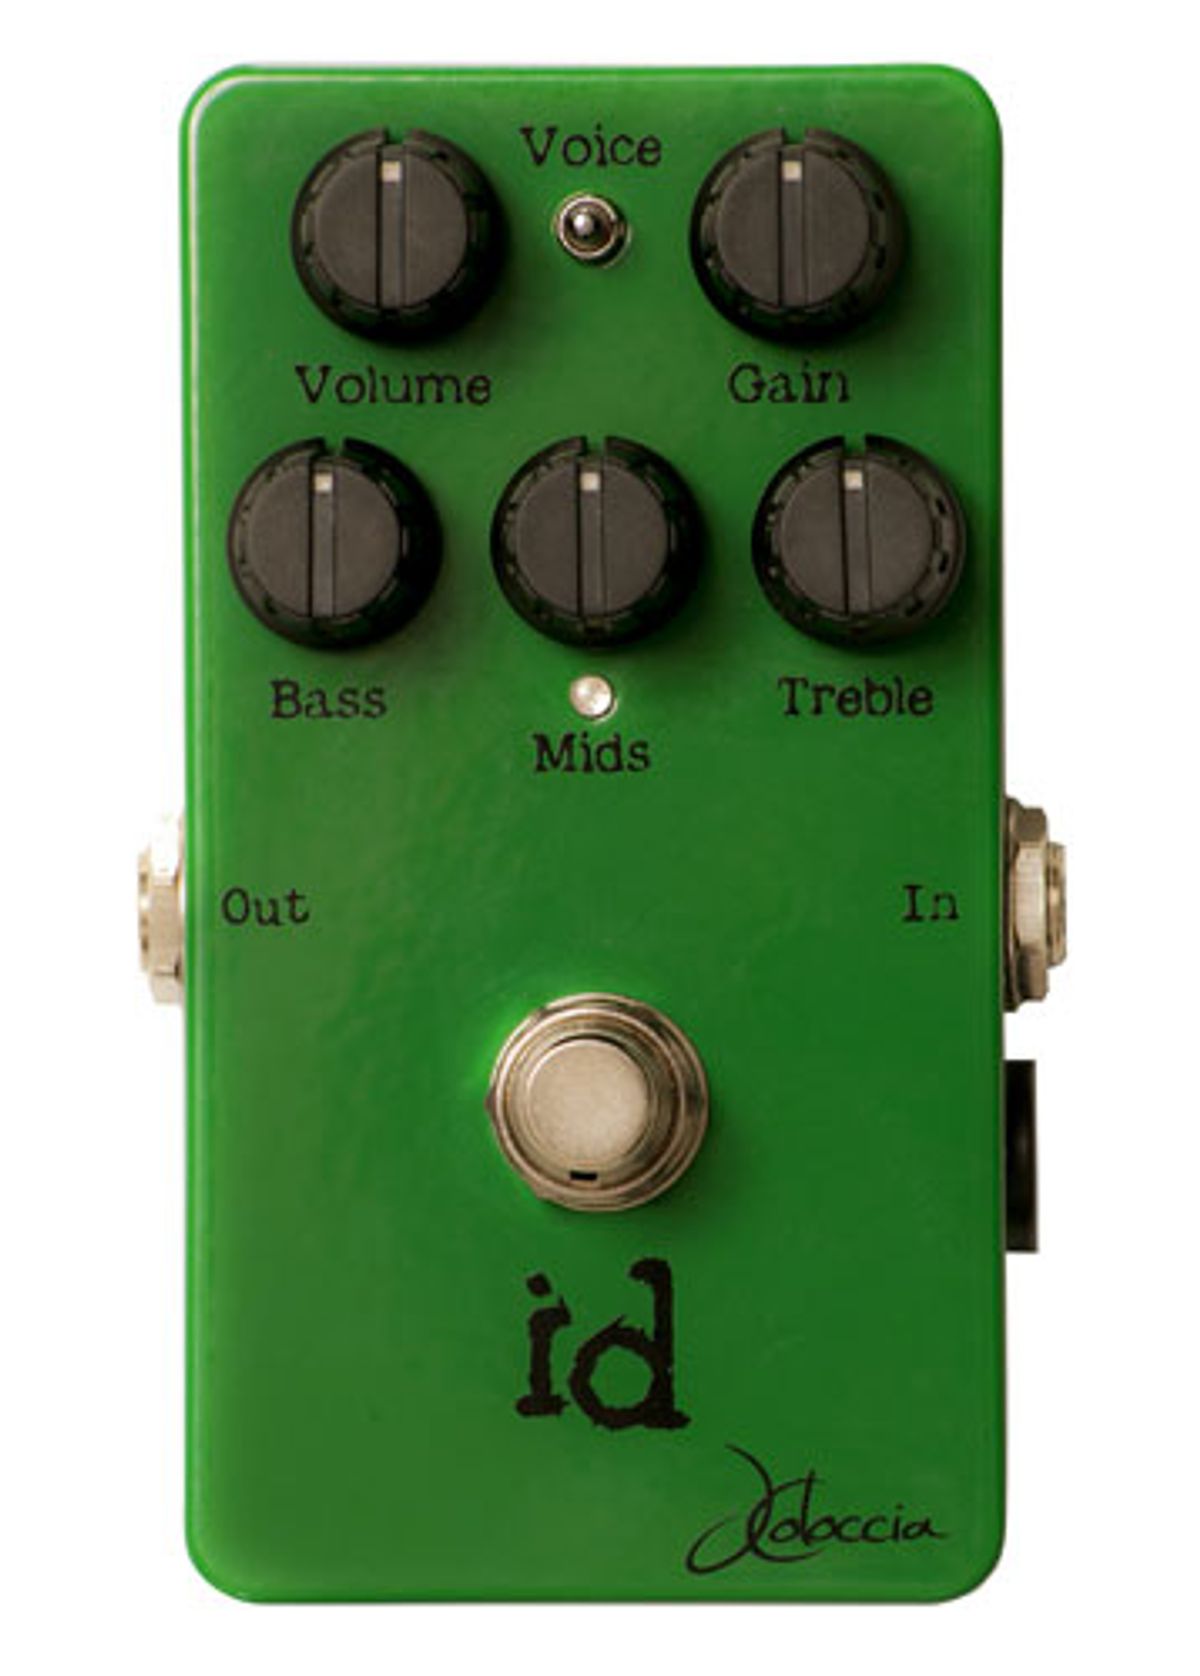 JColoccia Guitars Introduces the id Overdrive